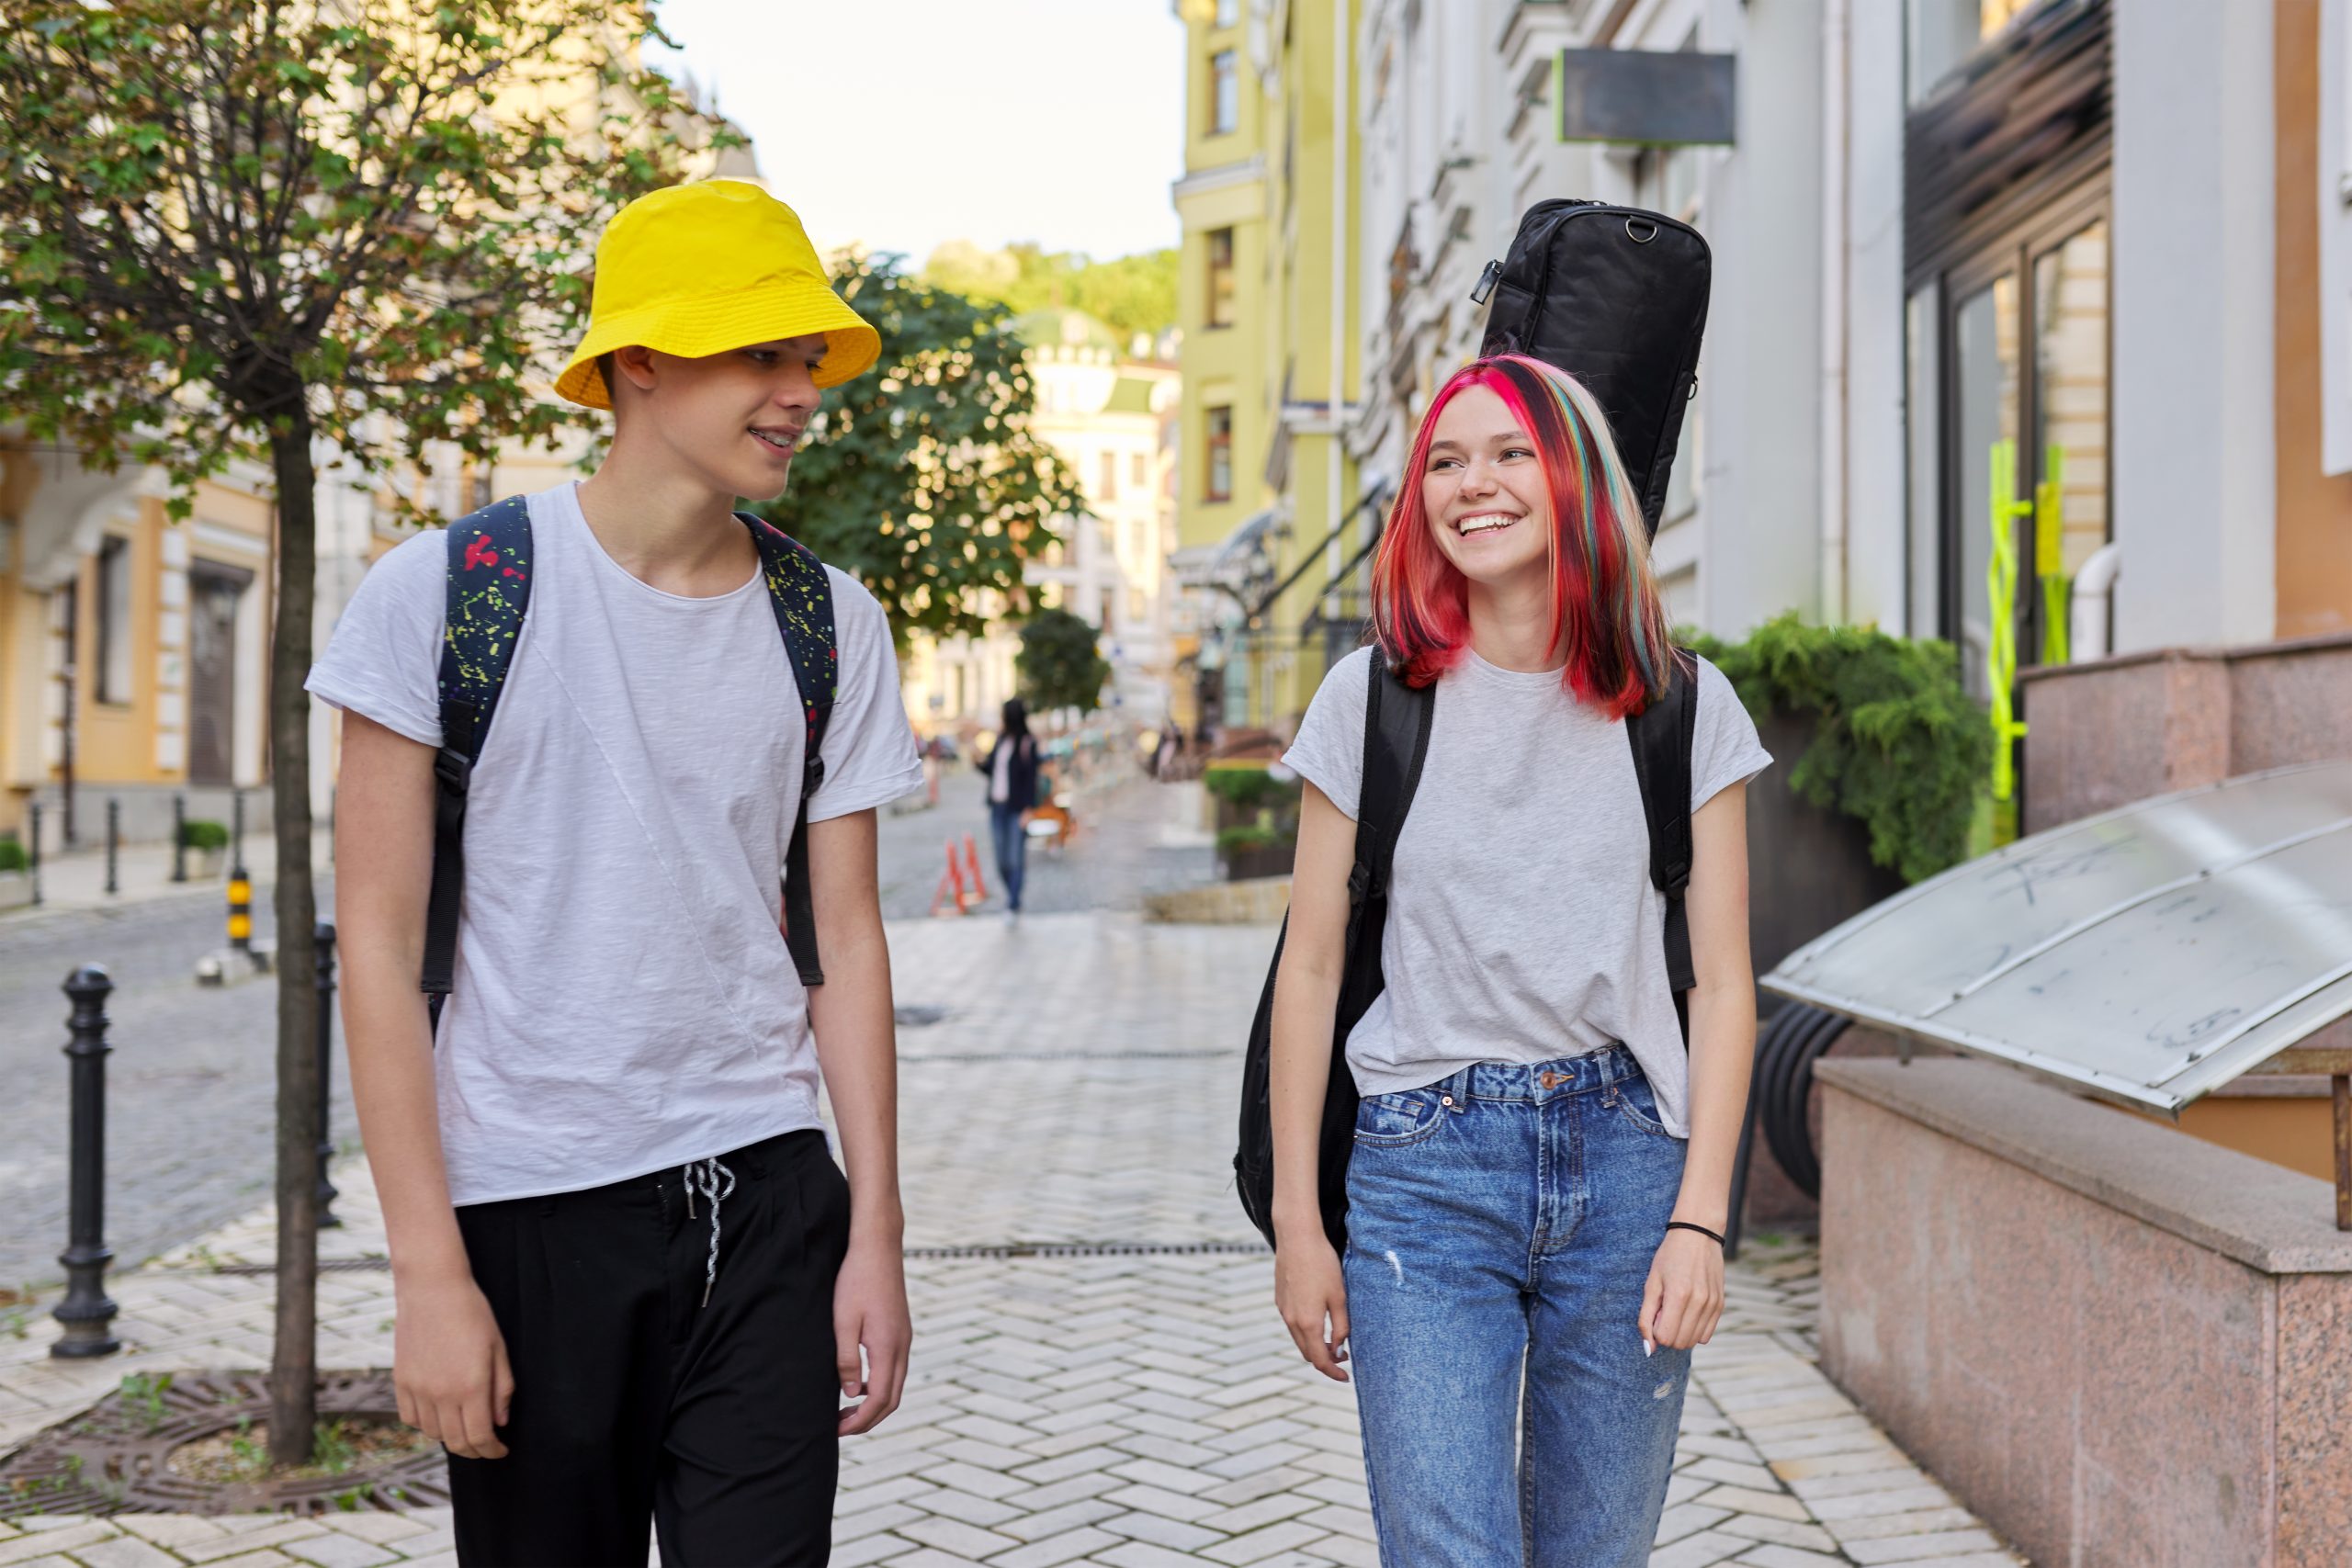 Creative fashionable happy teenagers guy and girl walking and talking along city street with guitar in case. Lifestyle, youth, city life